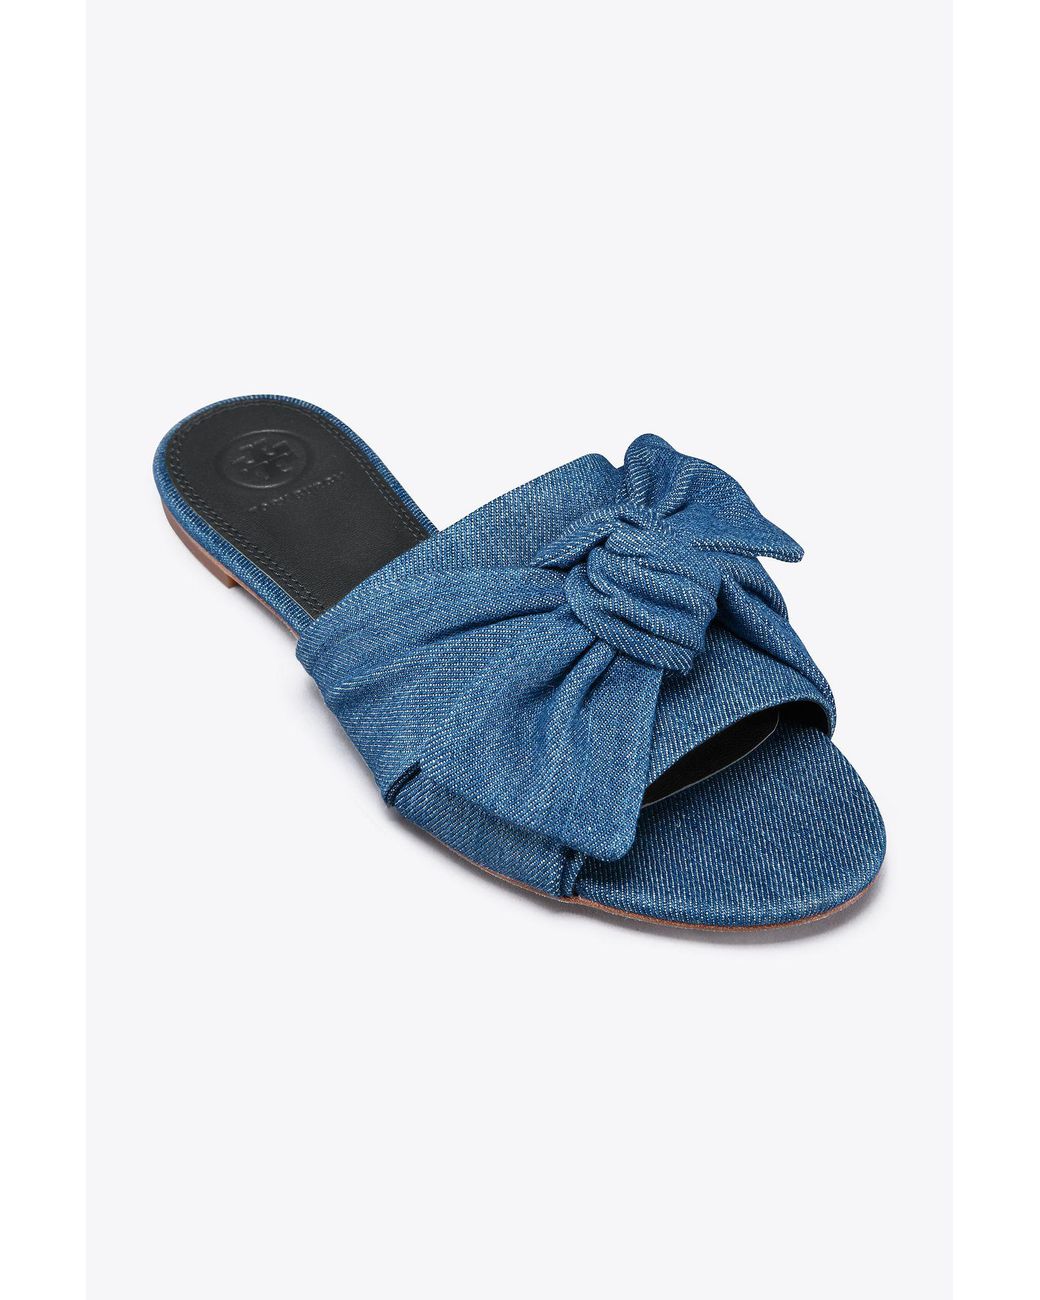 Tory Burch Annabelle Suede Bow Slide in Blue | Lyst